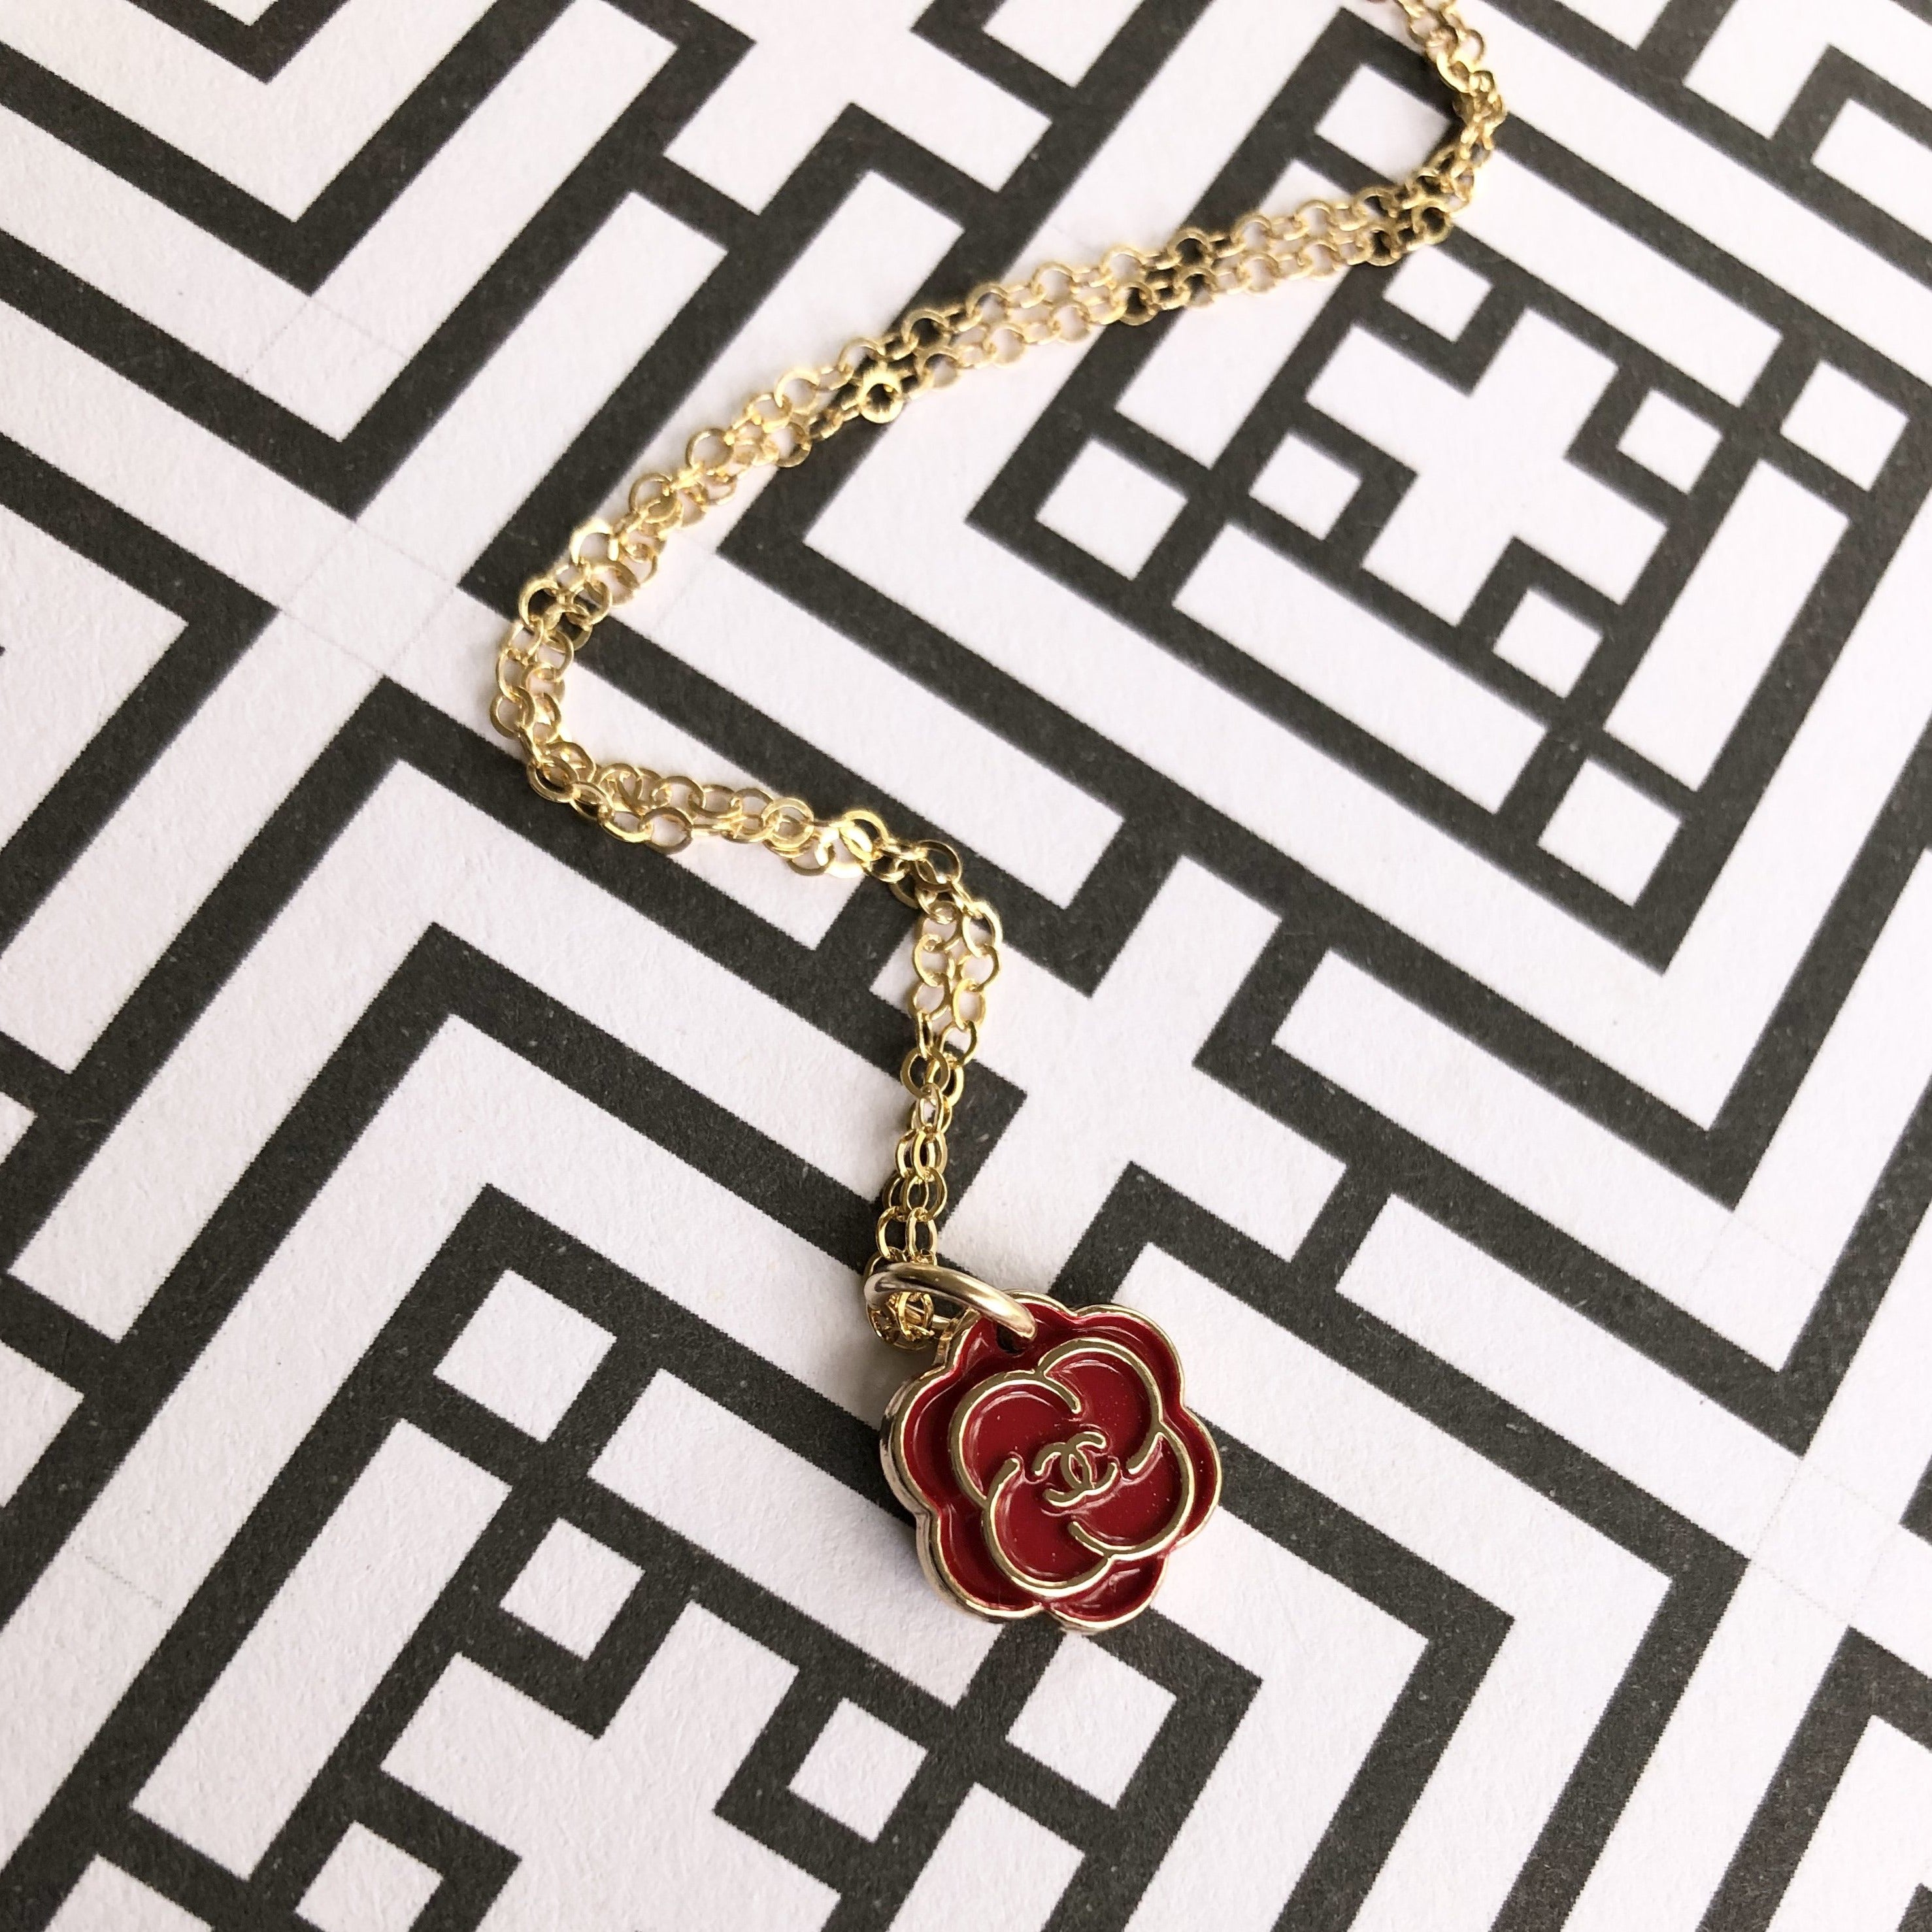 Small Gold and Red Chanel Flower Necklace